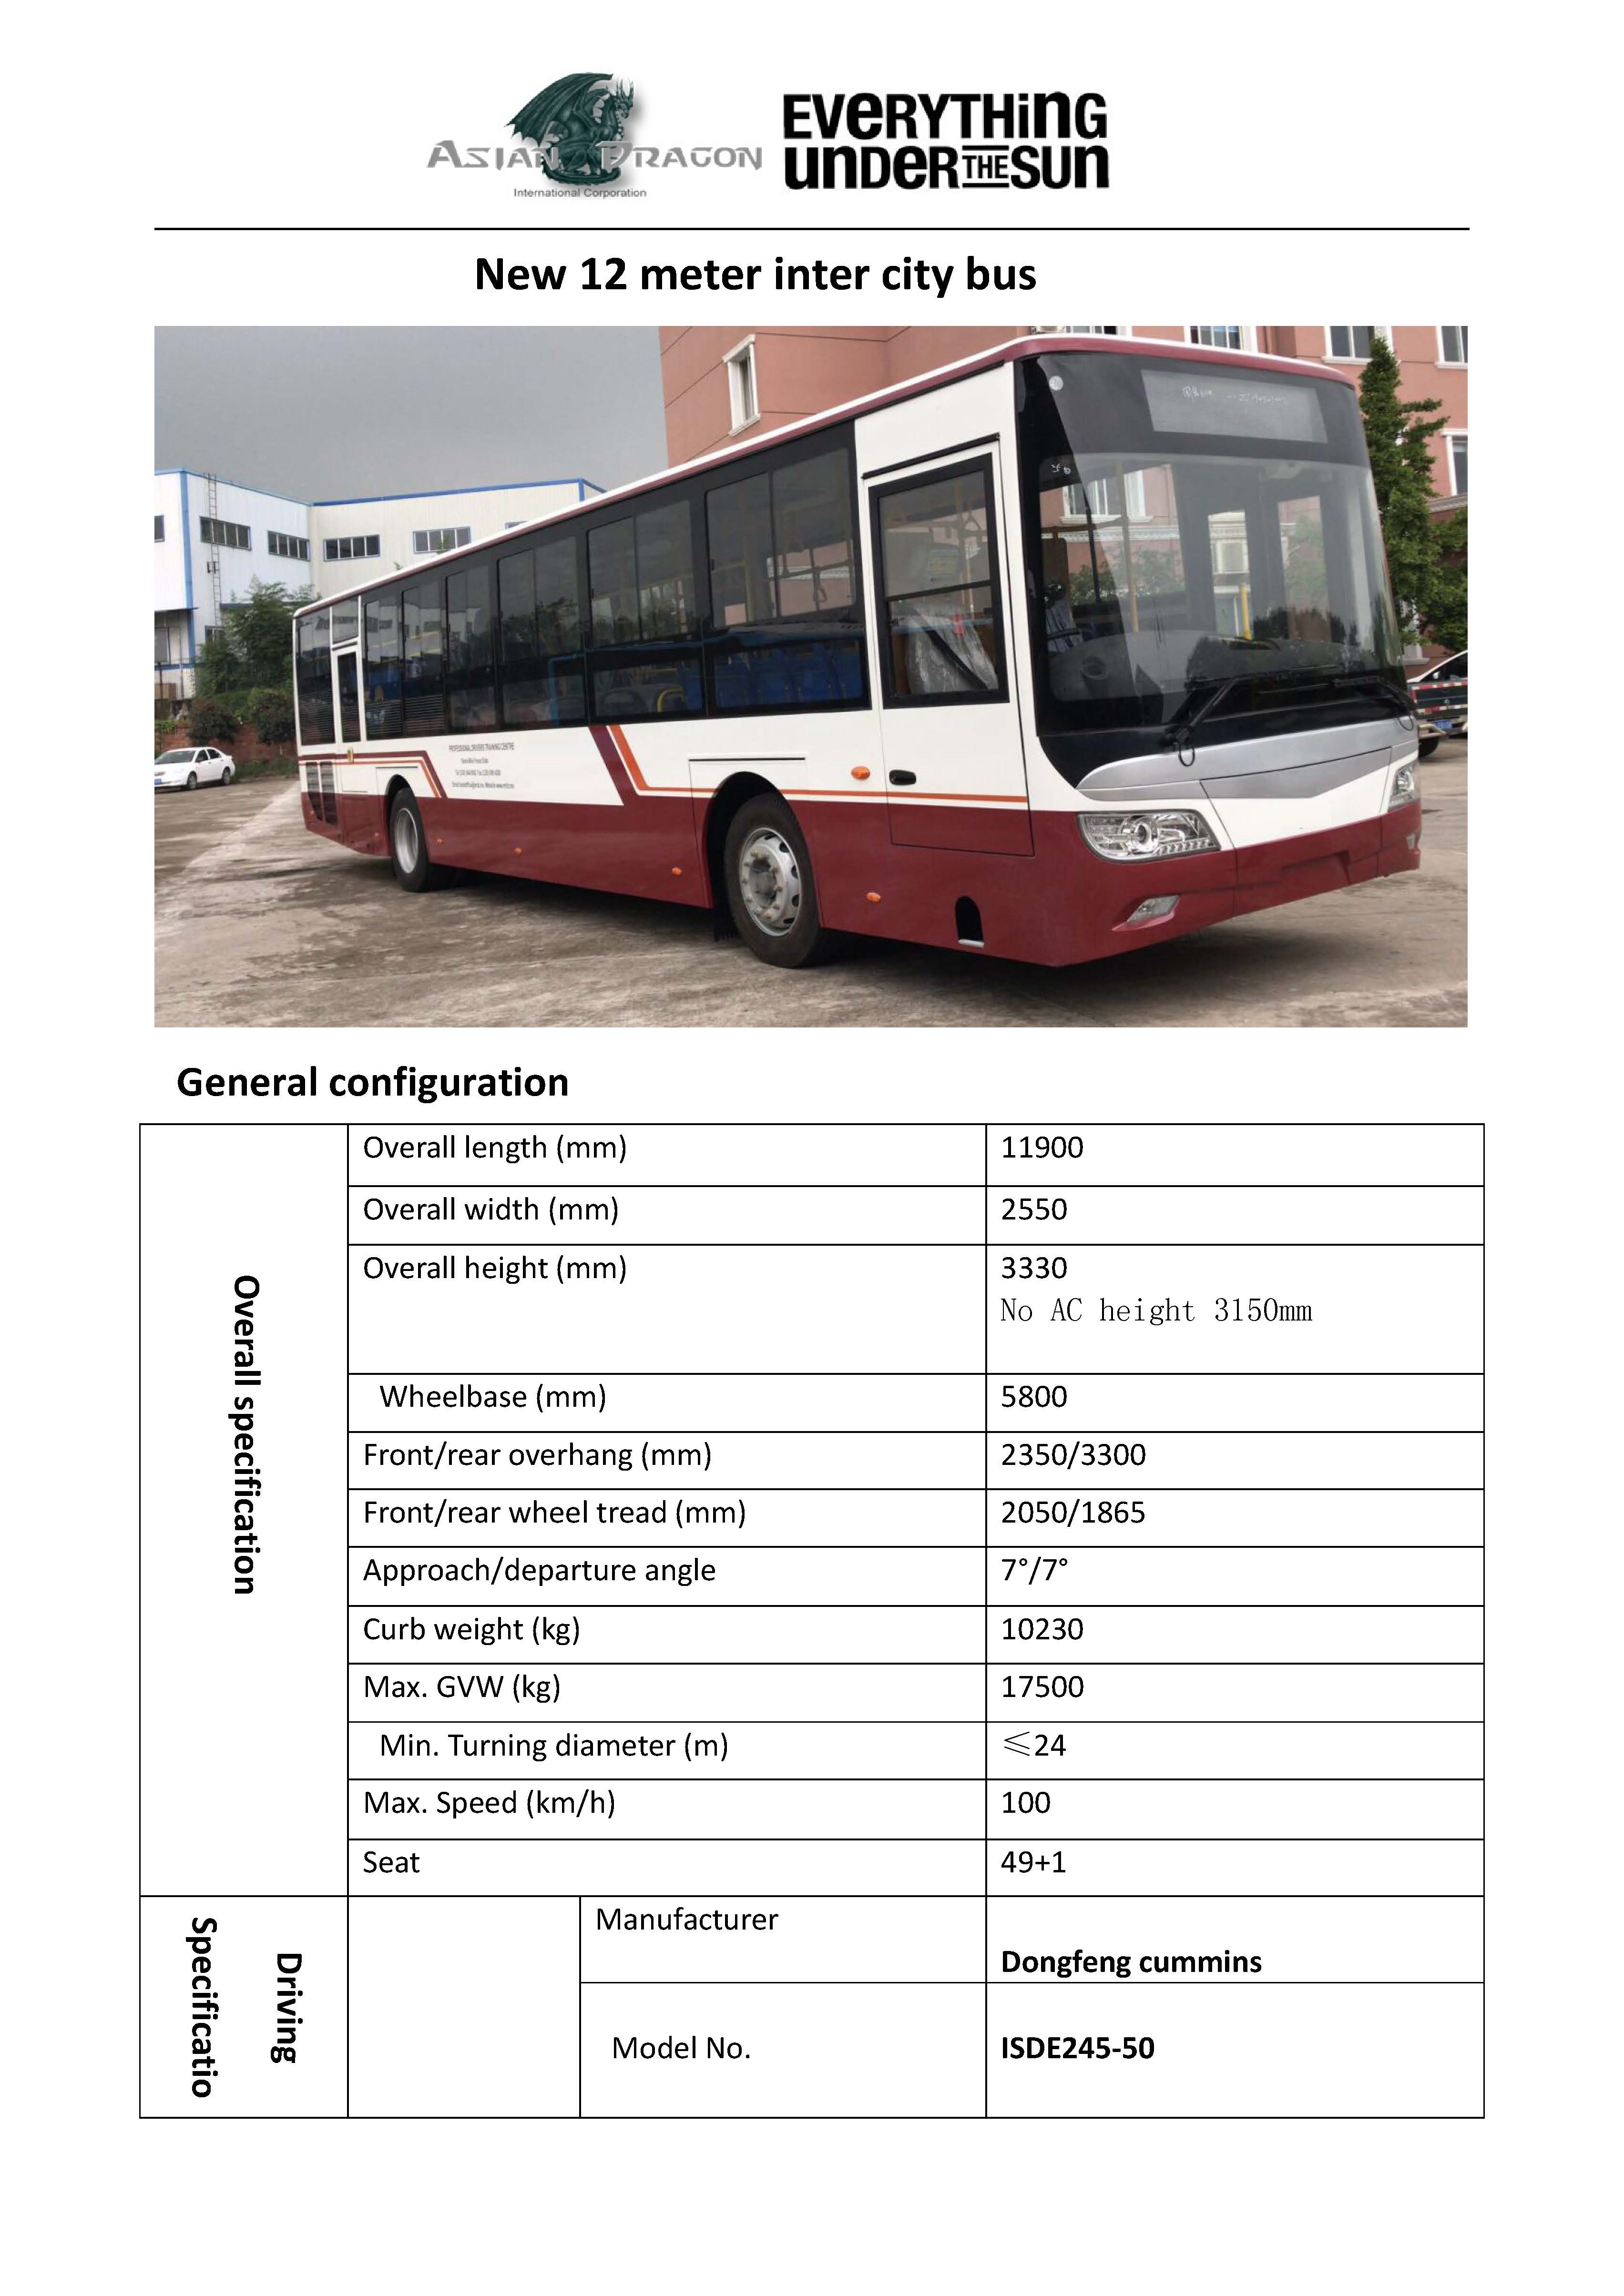 Specification of the 12m inter city bus